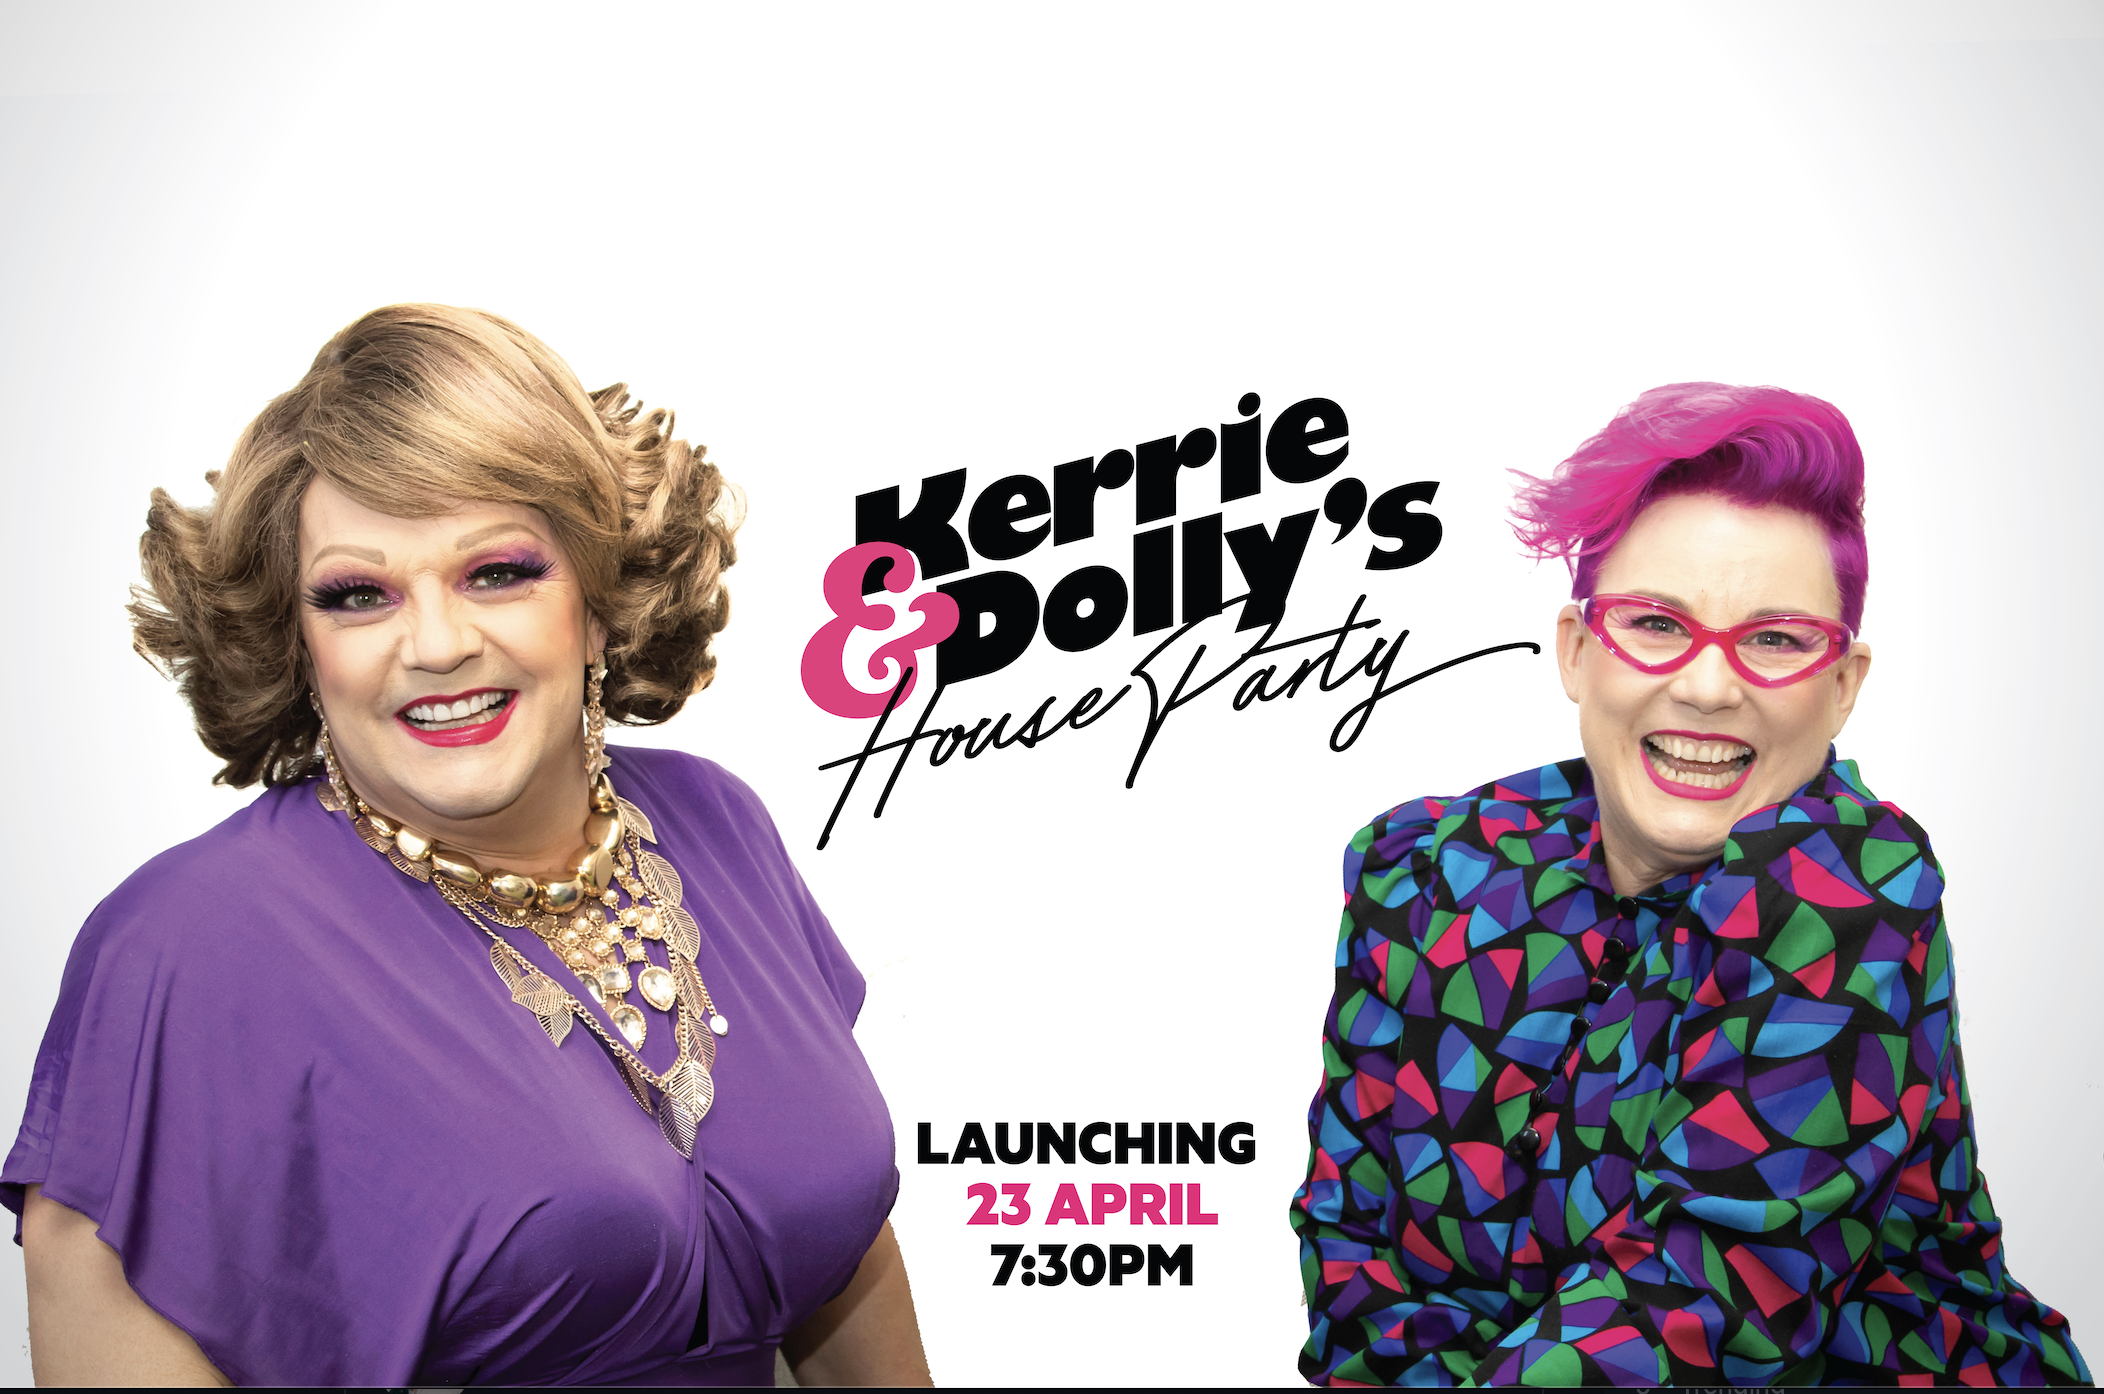 “Kerrie and Dolly’s House Party” launching on JOY TV!